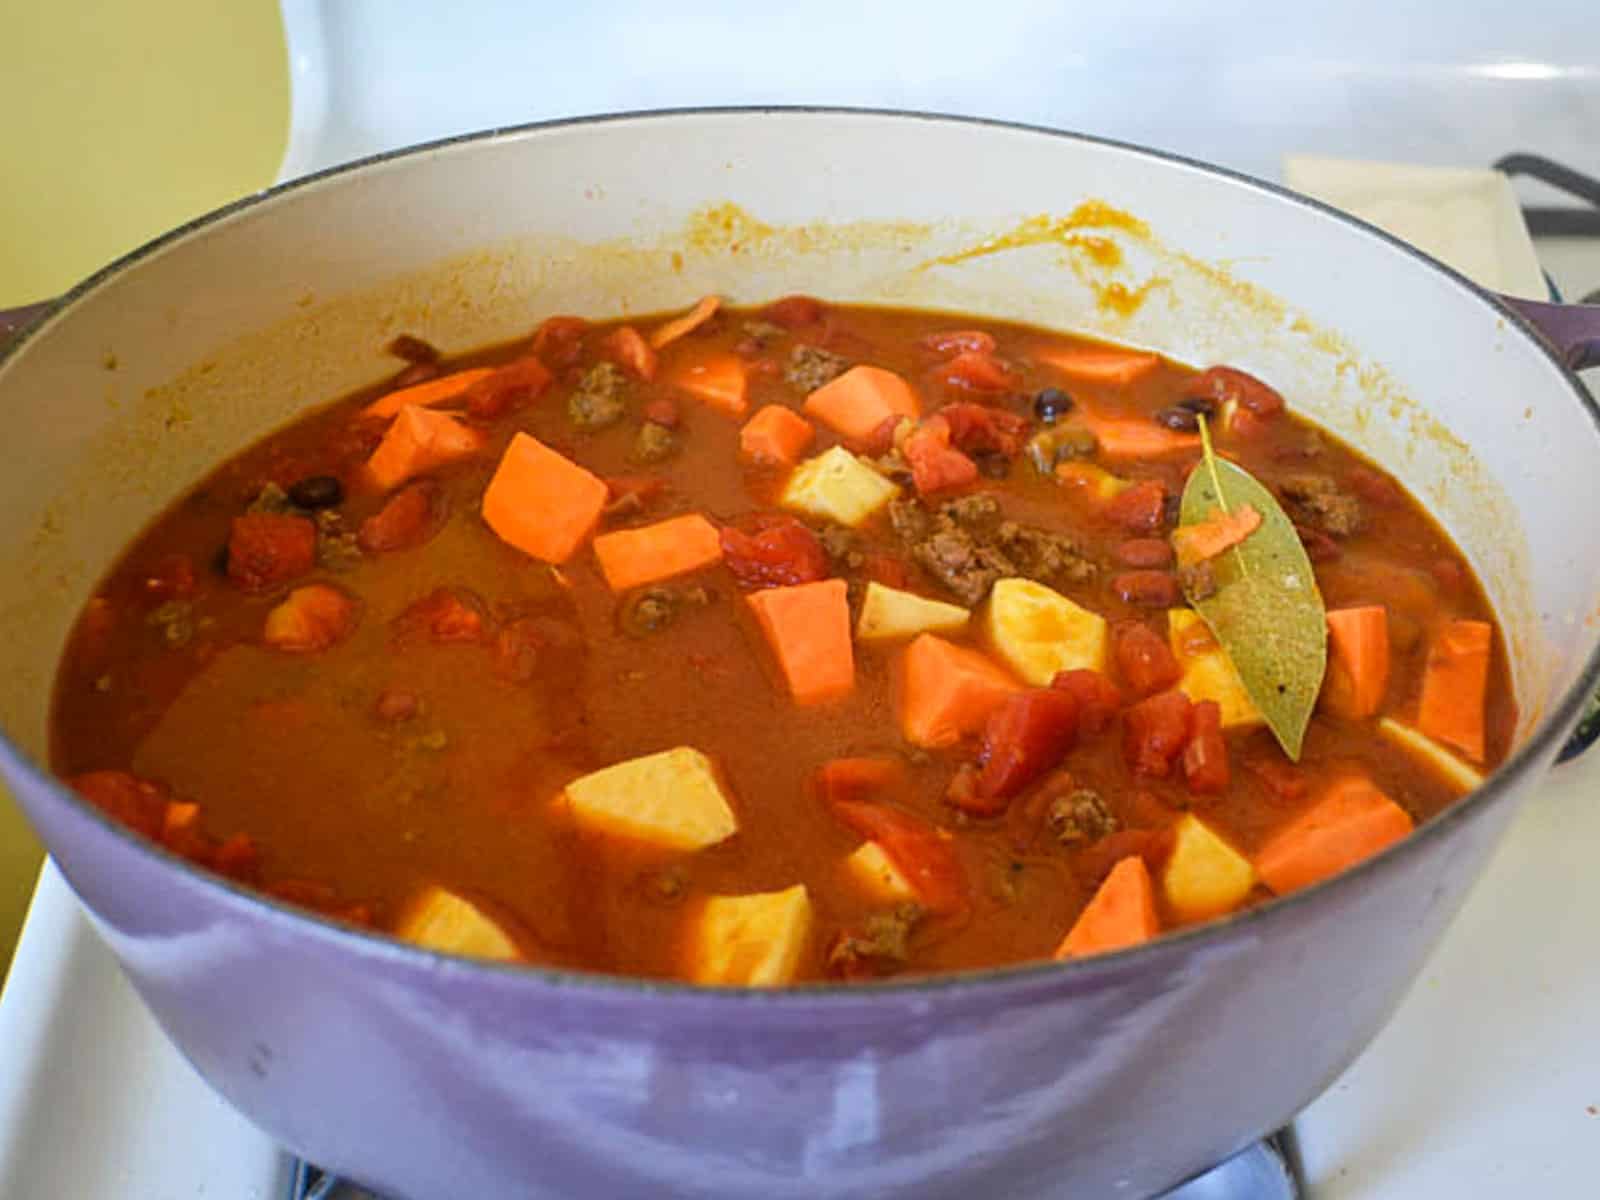 Add stock and chunks of squash into the pumpkin chili and cook until the squash is fork tender and liquid has reduced slightly.